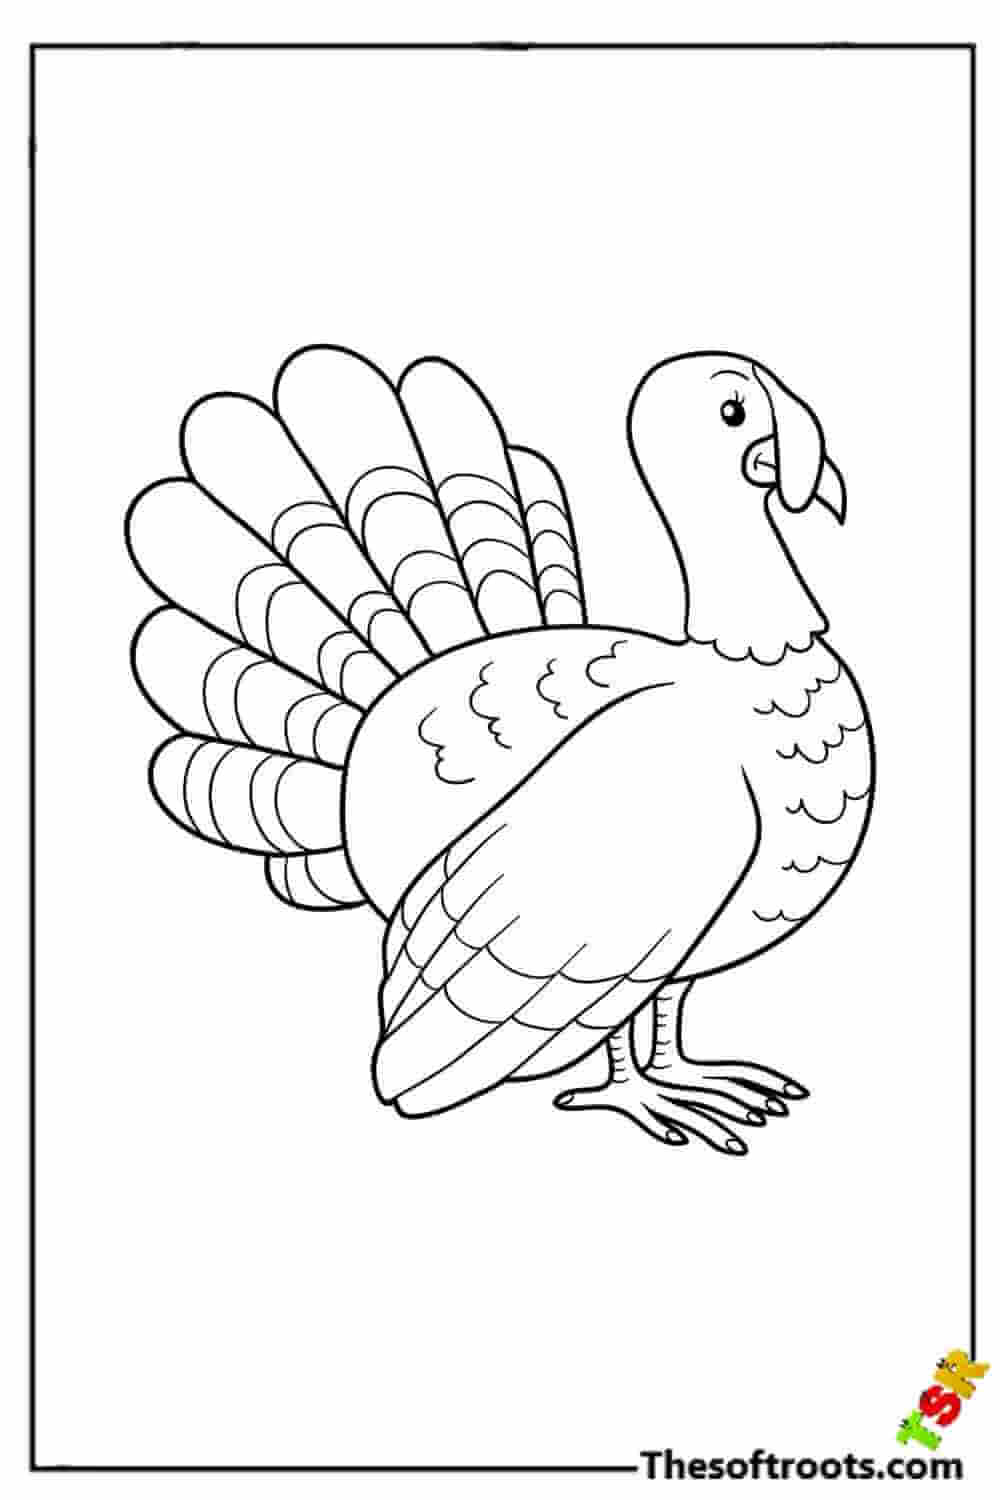 Turkey wings on hips coloring pages